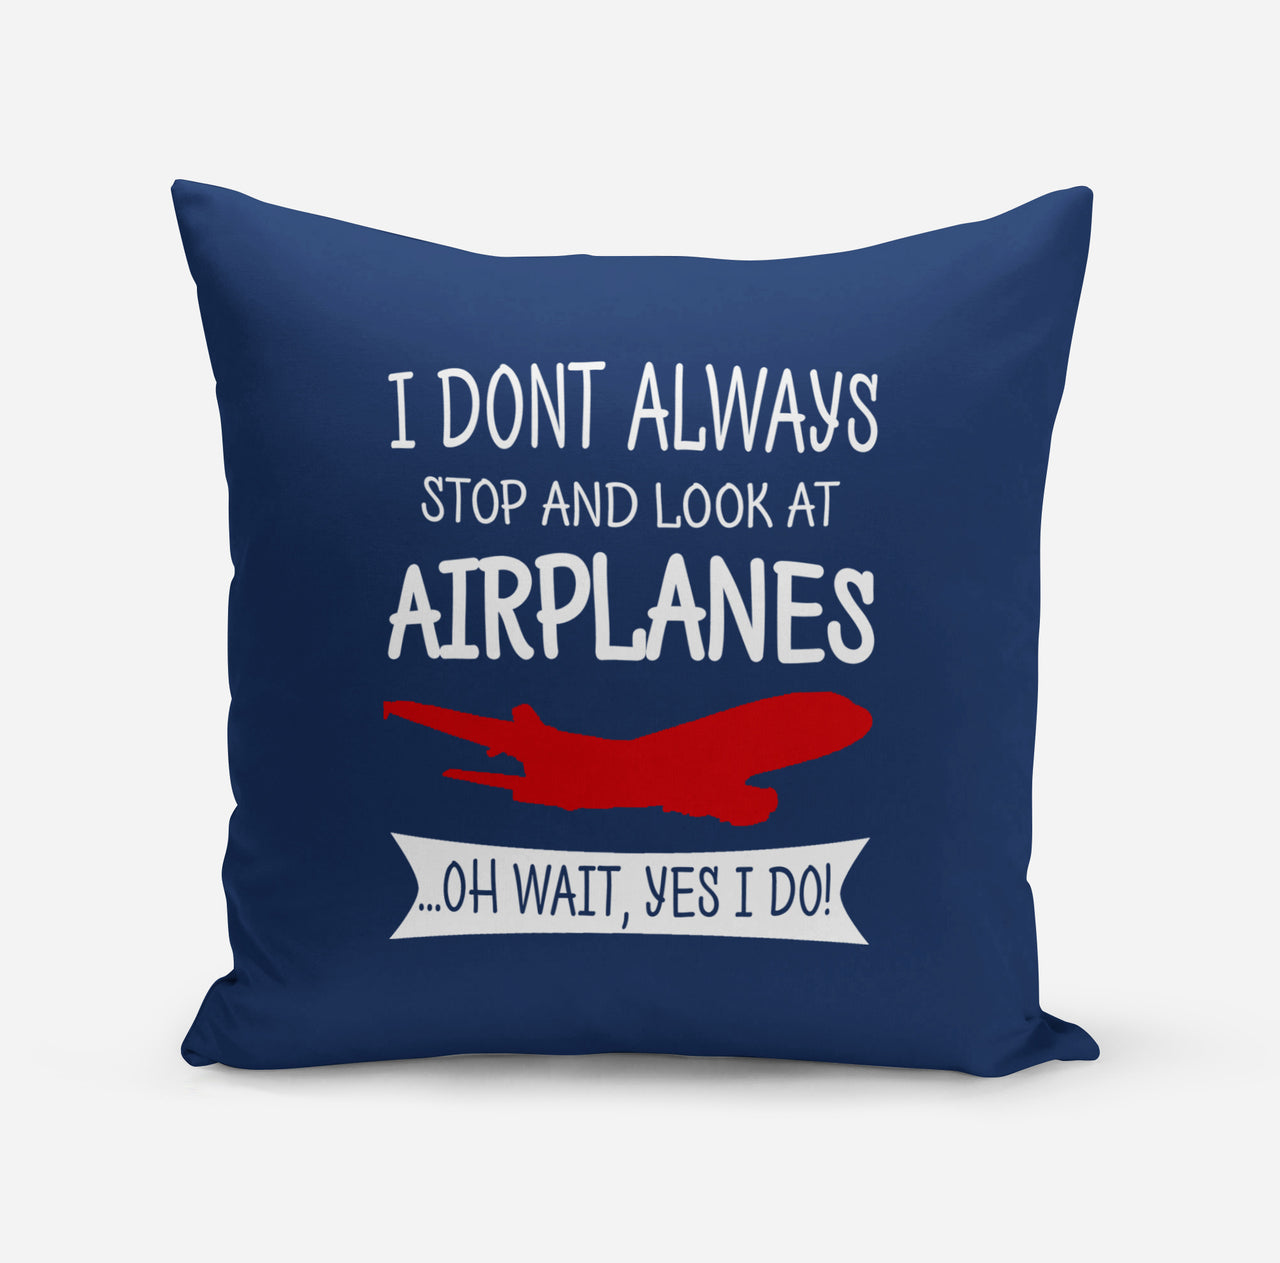 I Don't Always Stop and Look at Airplanes Designed Pillows